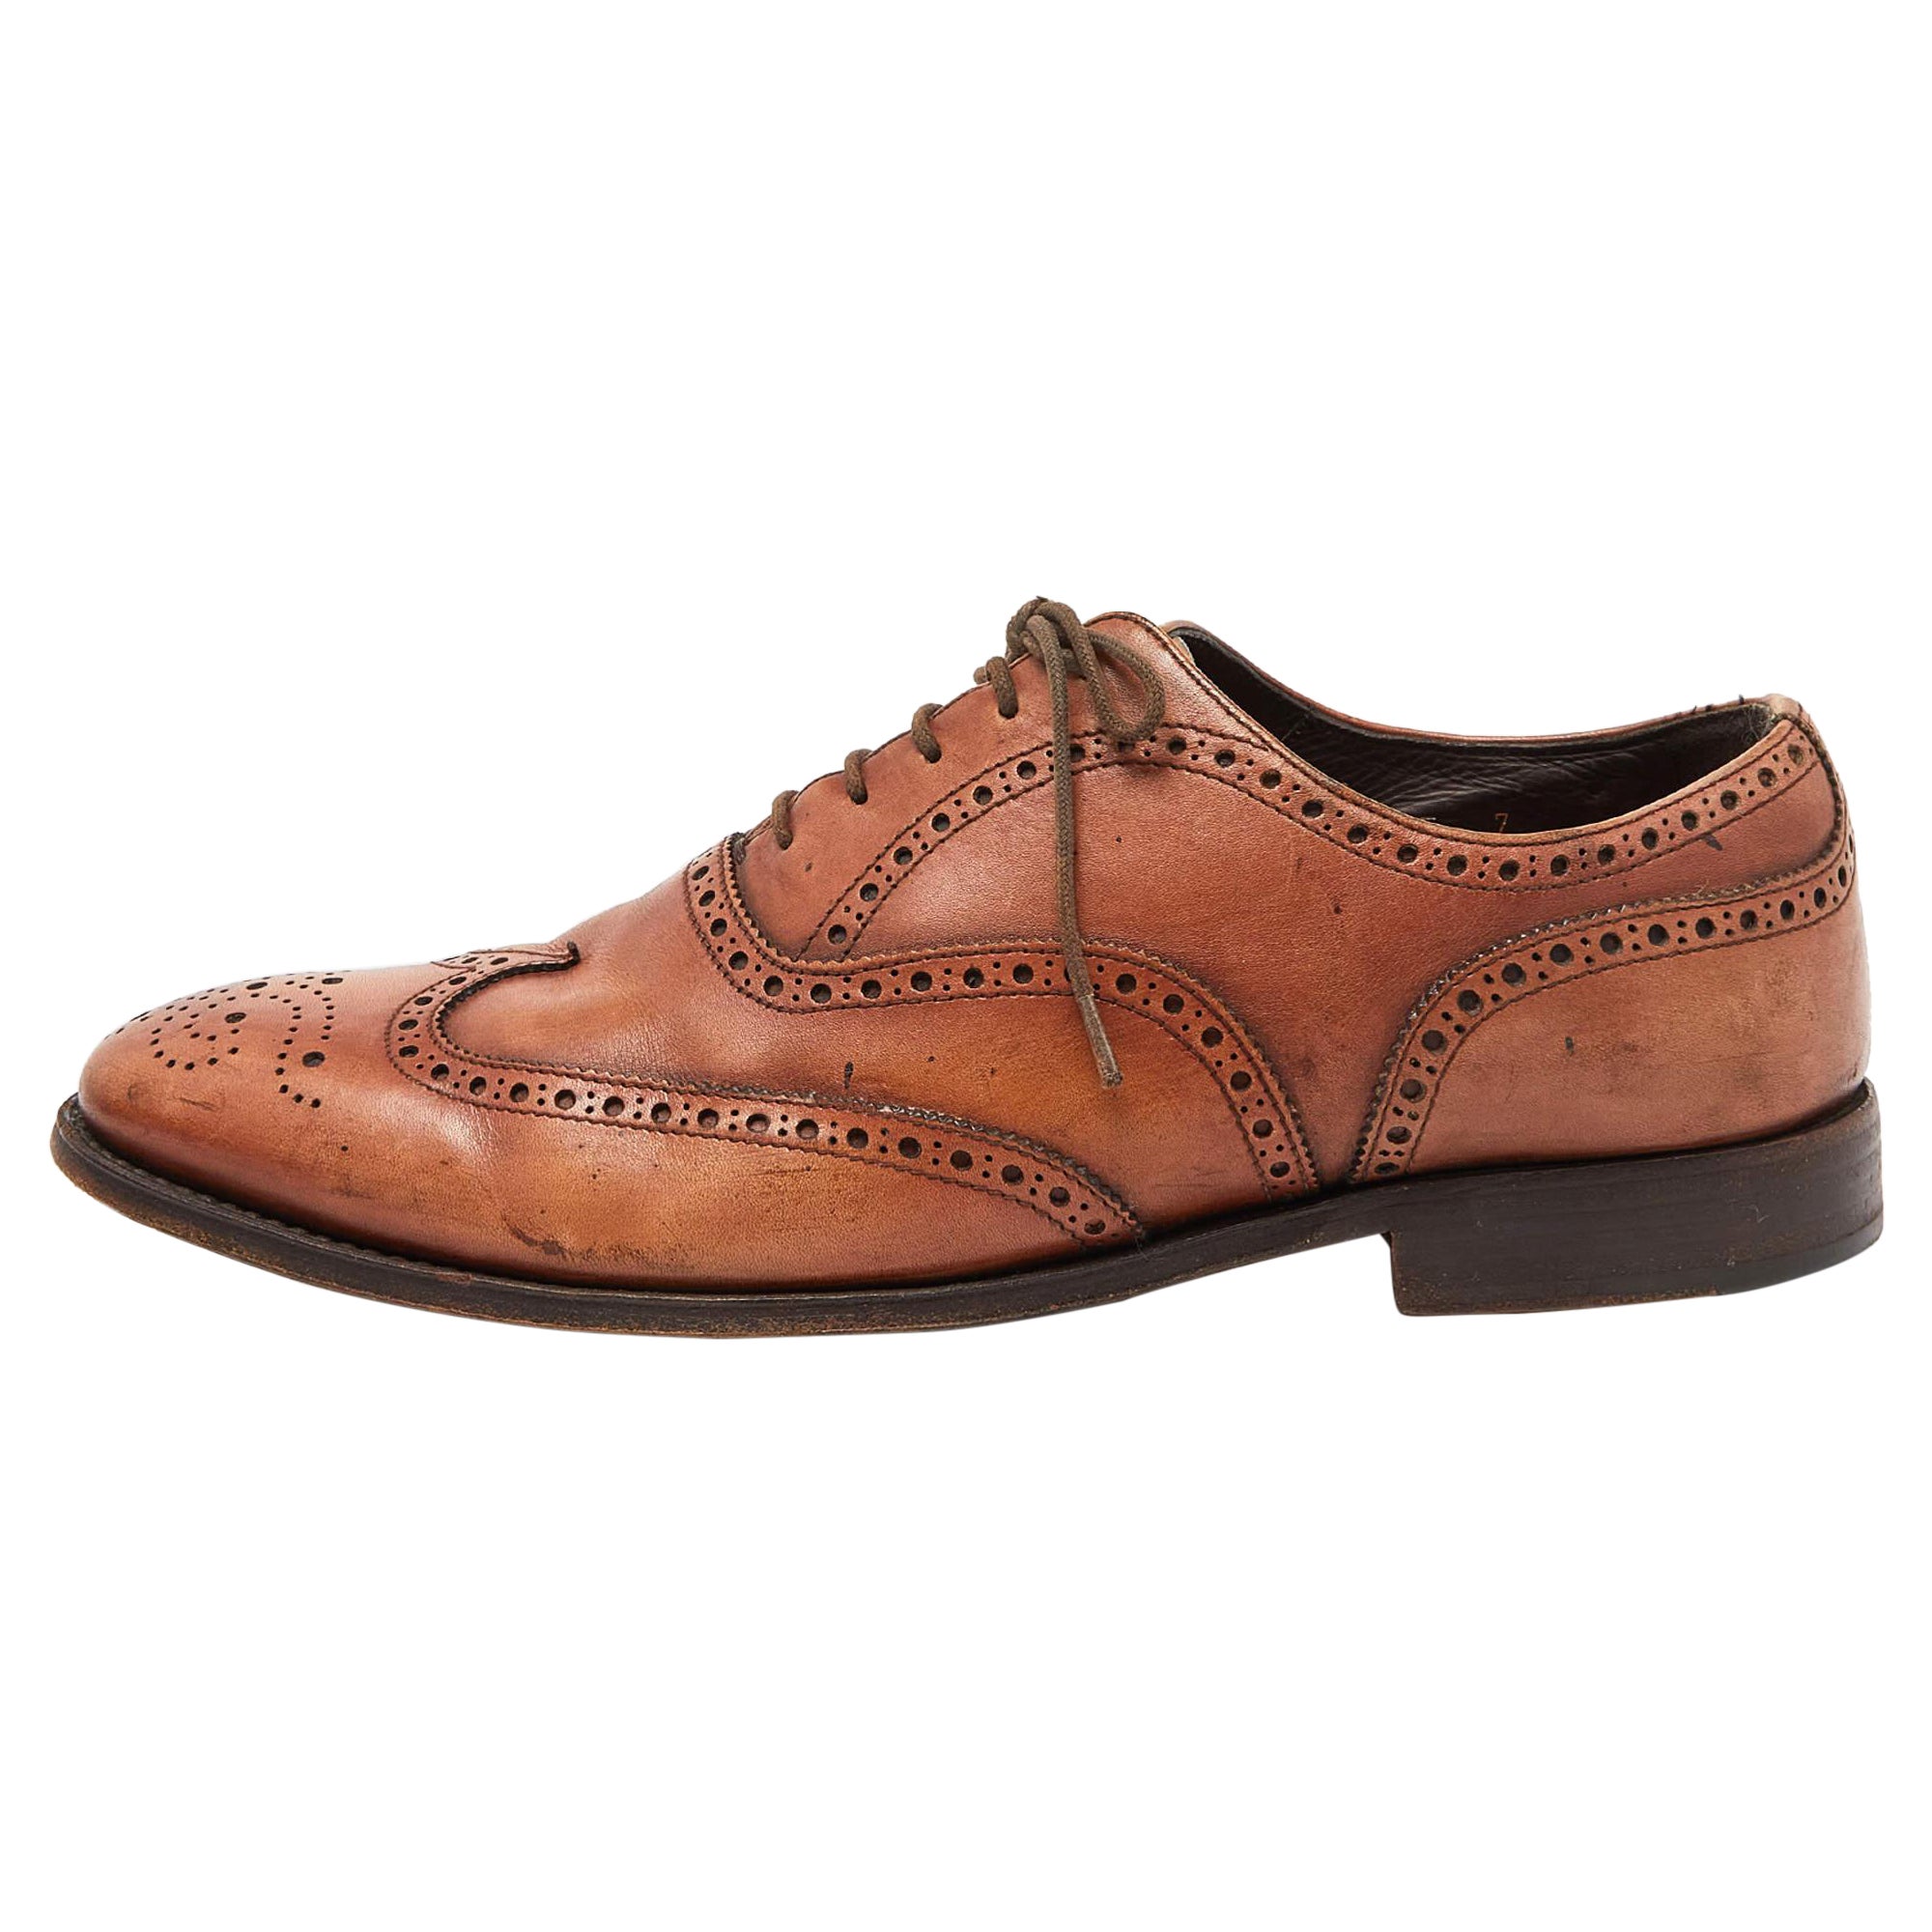 Prada Brown Leather Lace Up Oxfords Size 41 For Sale